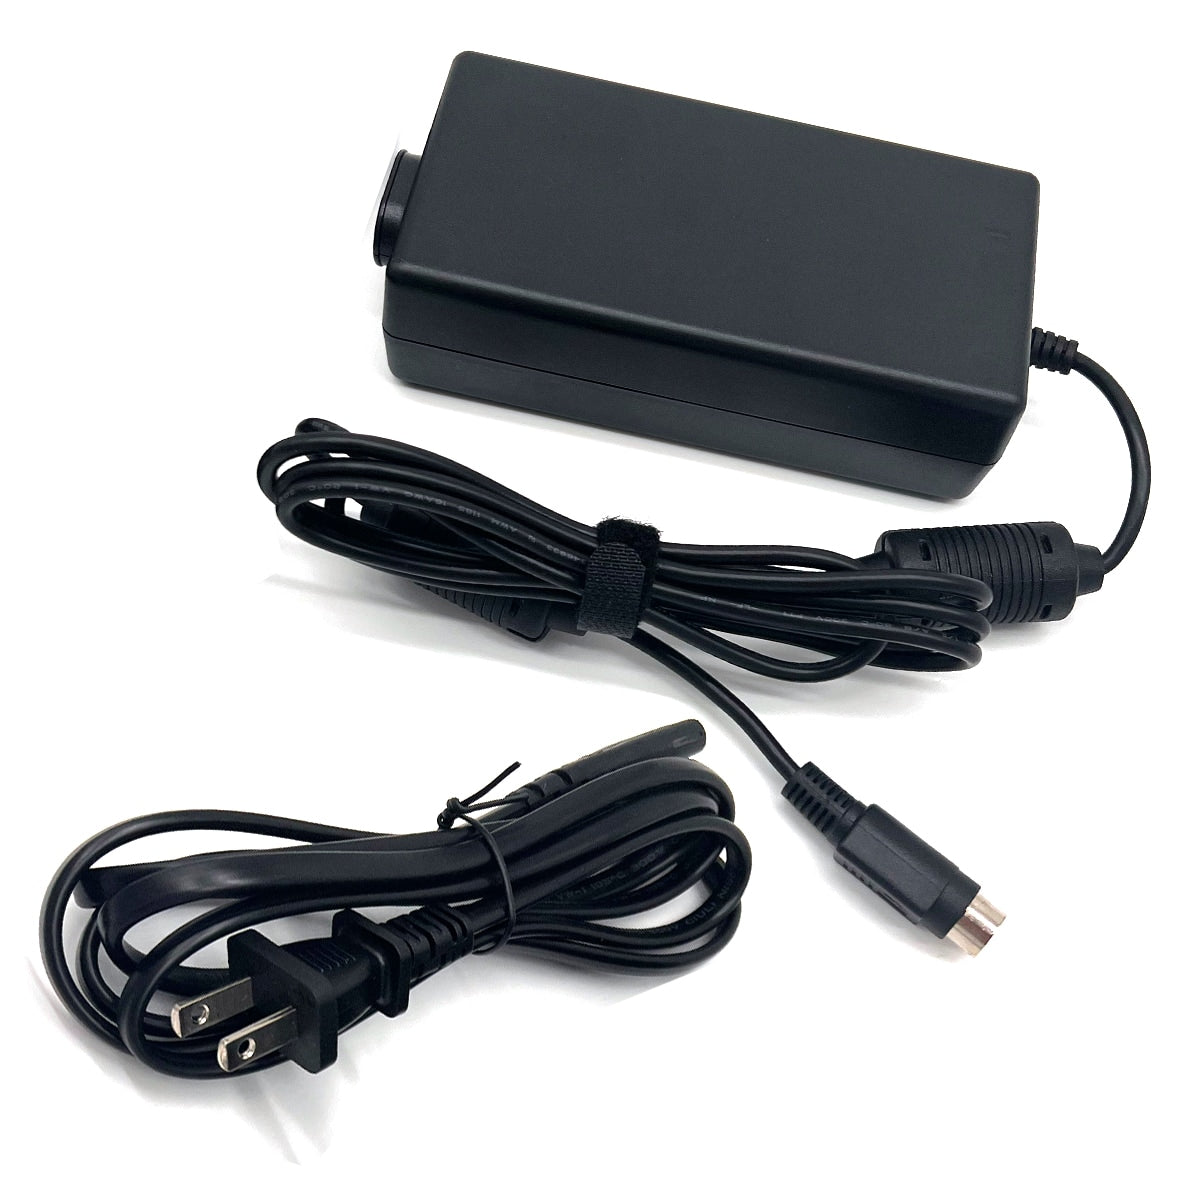 AC Power Supply for Luna TravelPAP Auto CPAP Machines (COMING SOON)